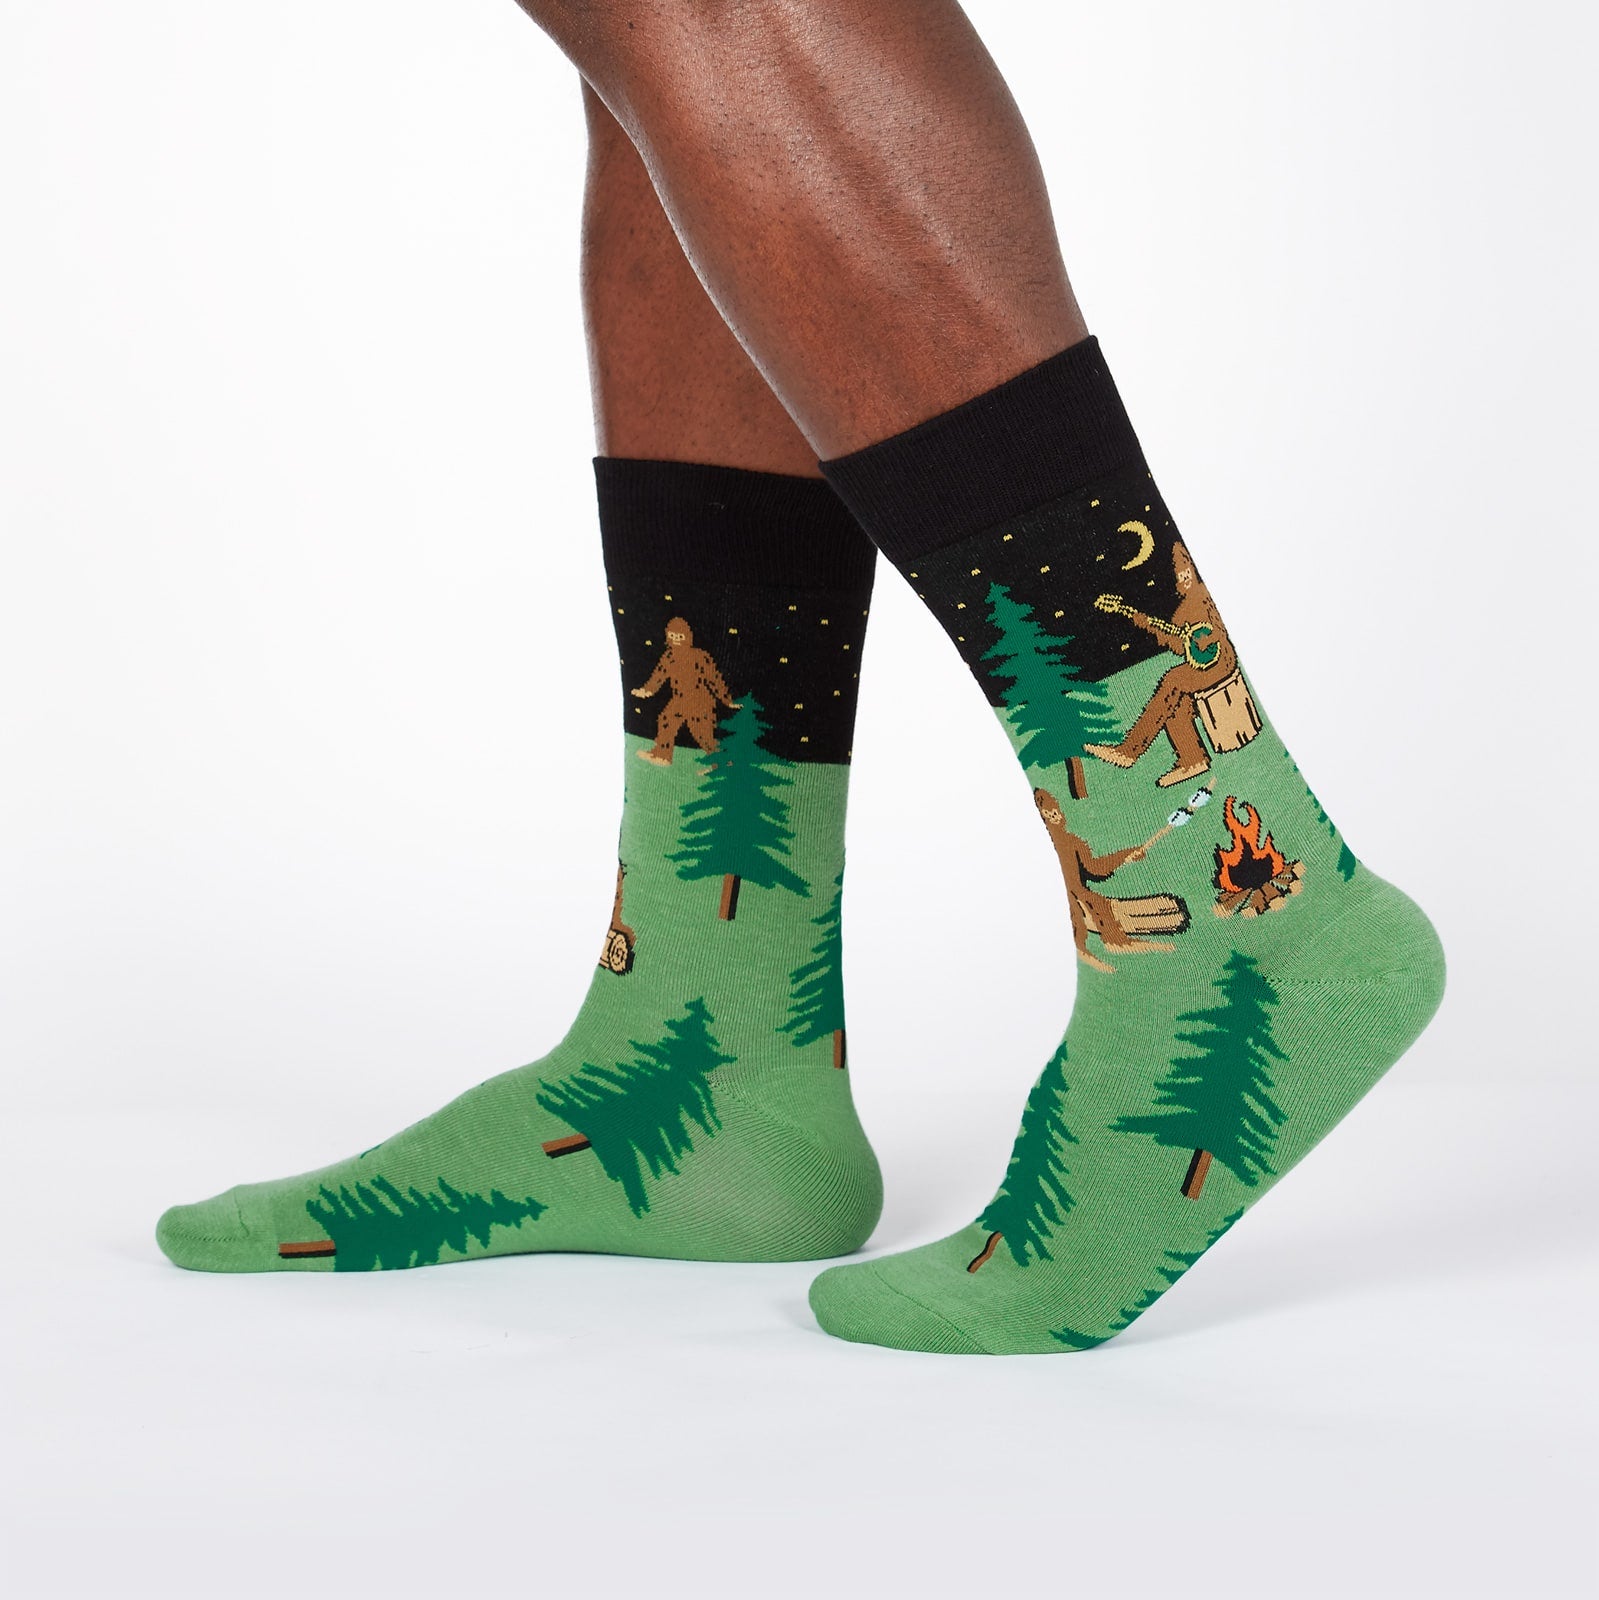 Sock It To Me Sasquatch Camp Out men's socks on model showing Sasquatch playing a big banjo and little Sasquatch roasting marshmallows by a campfire